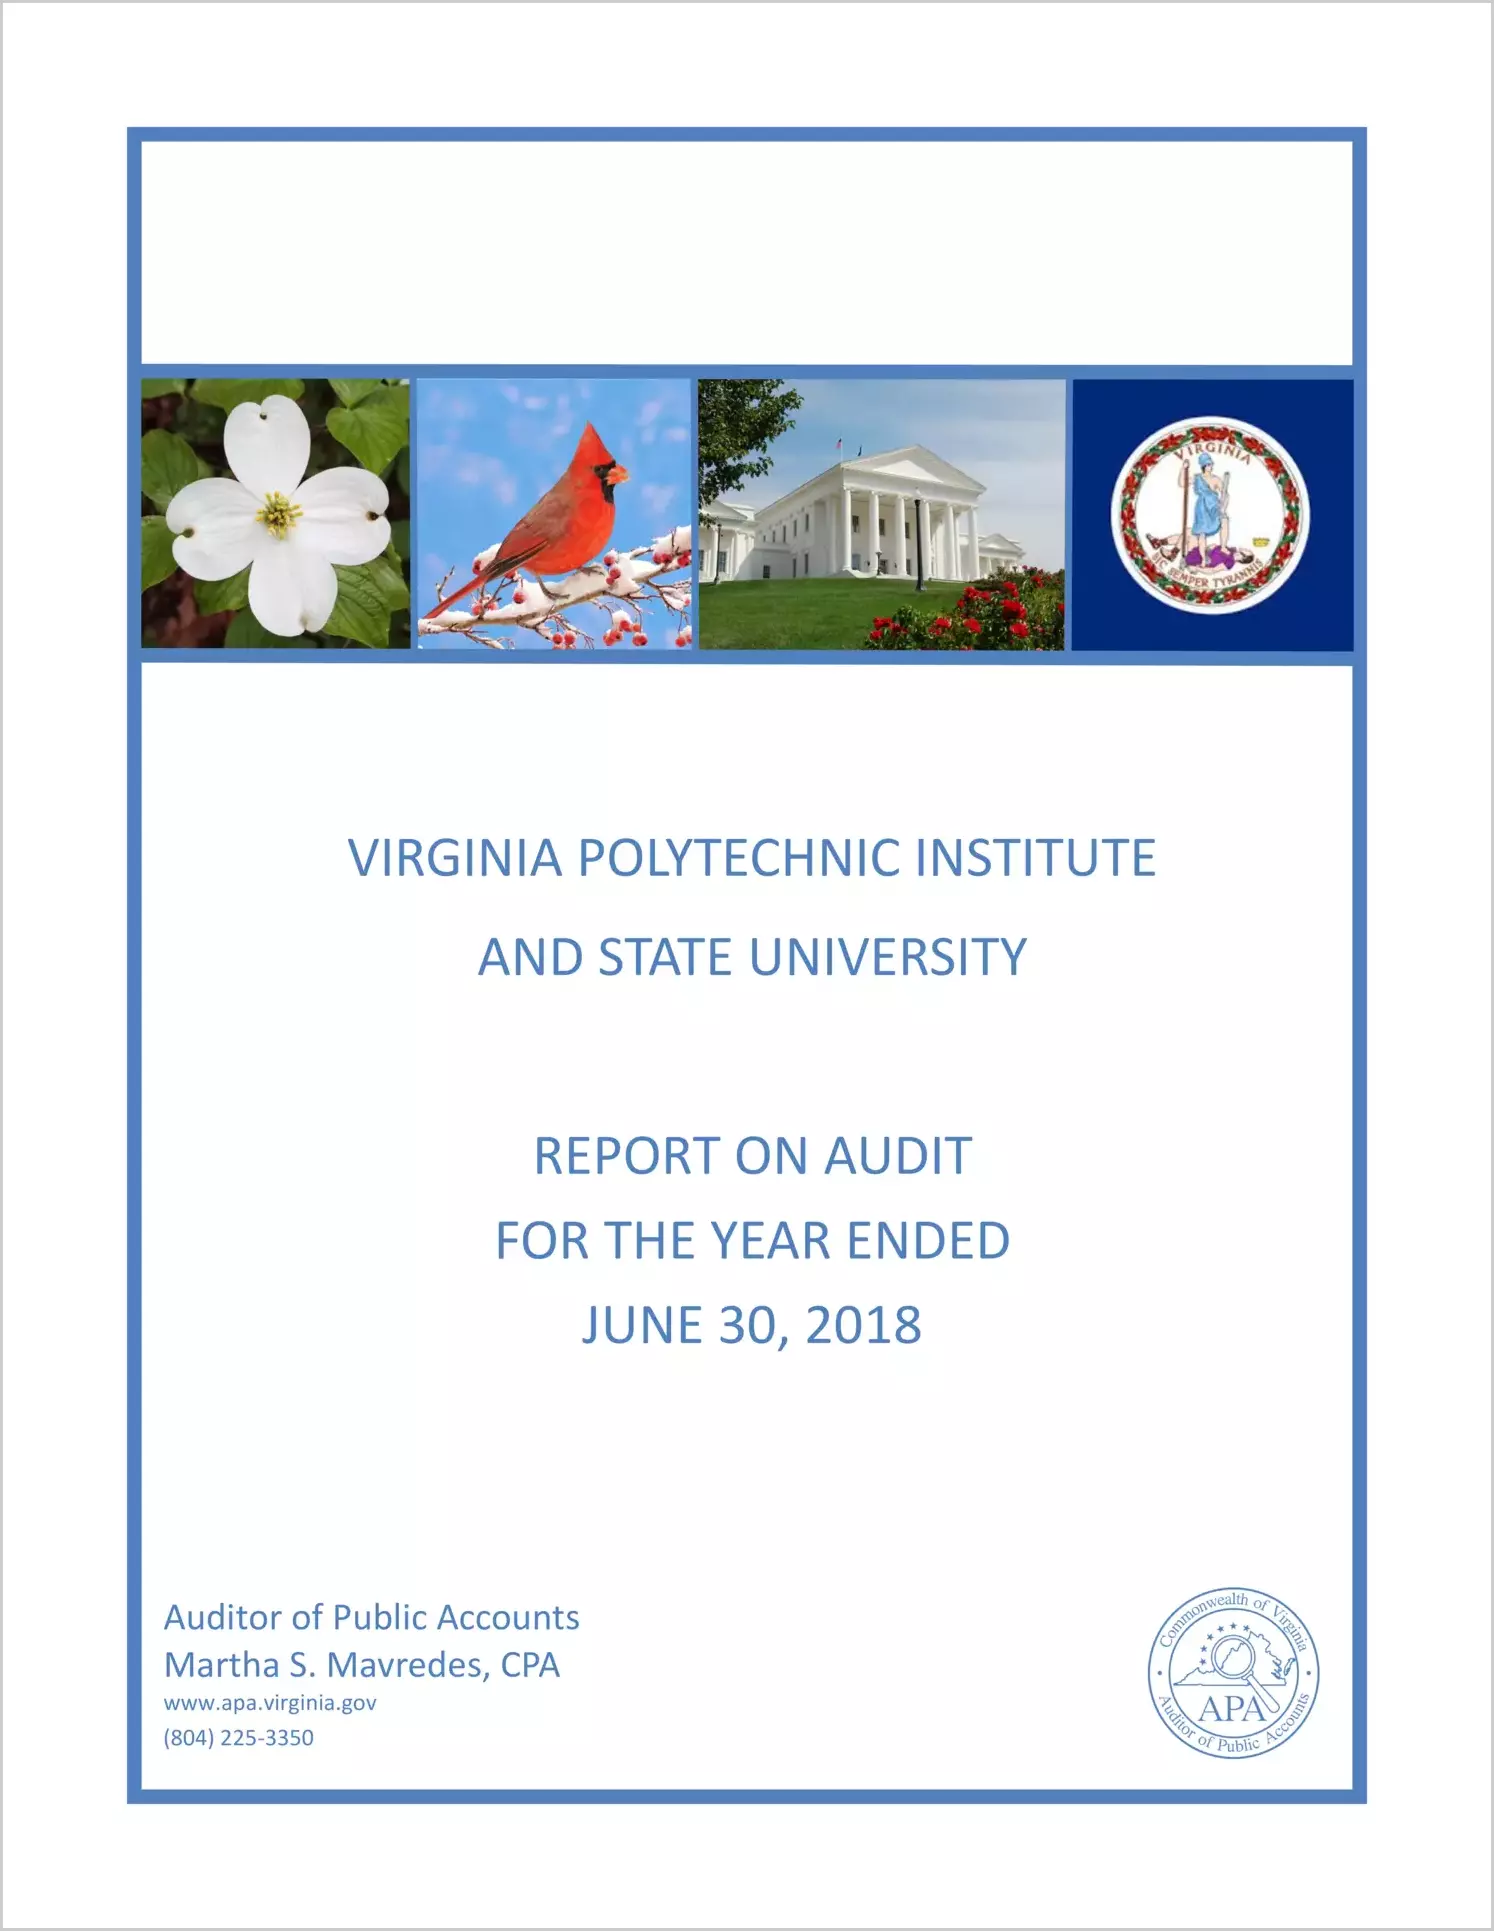 Virginia Polytechnic Institute and State University for the year ended June 30, 2018